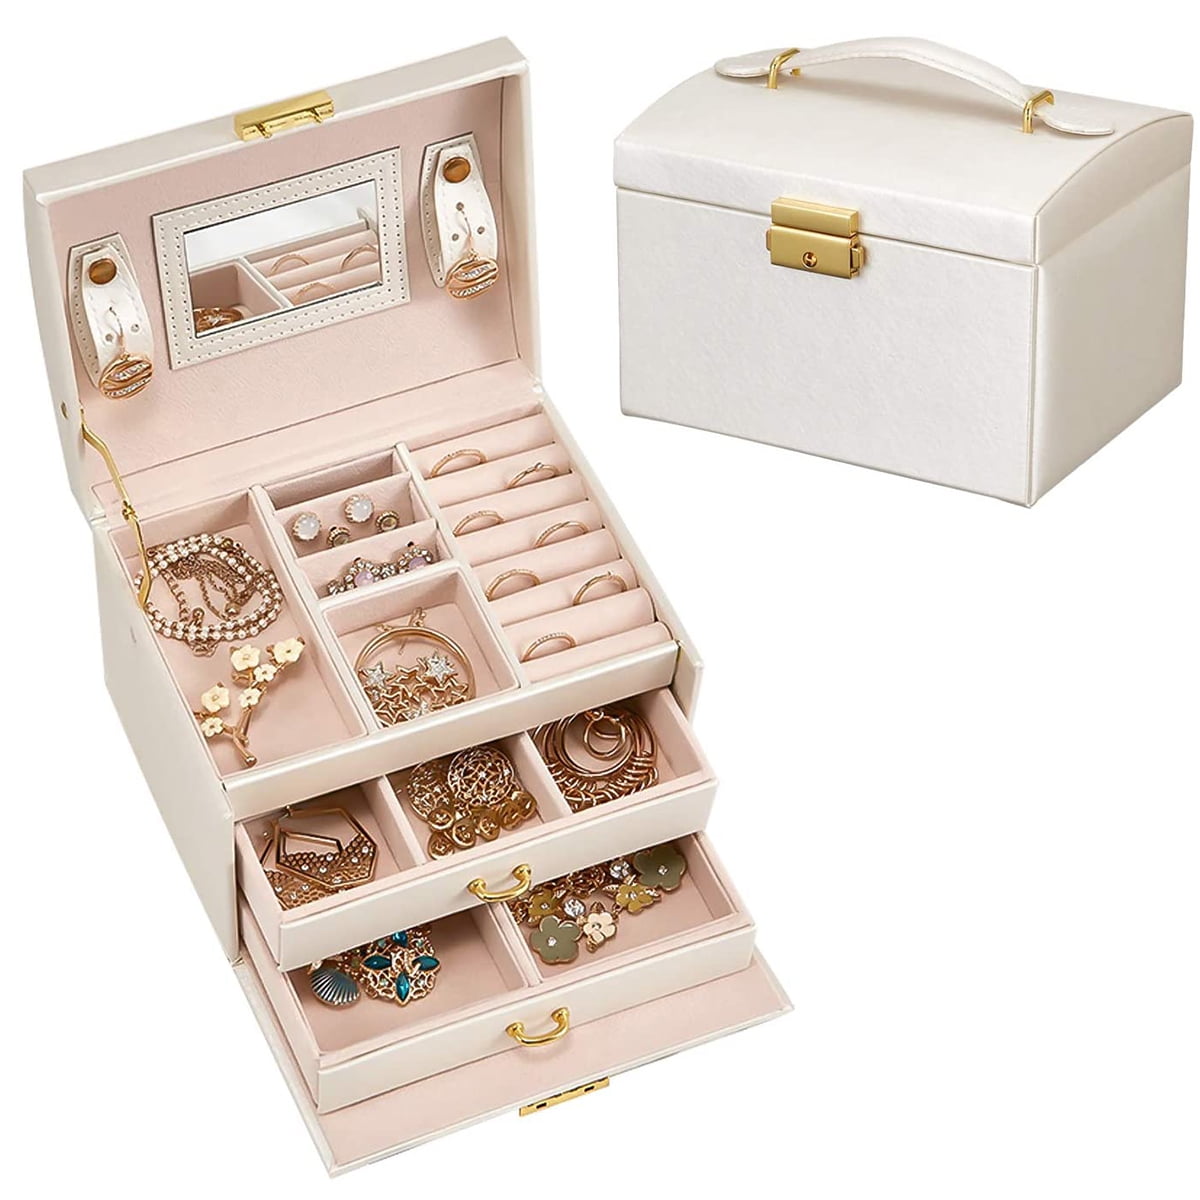 Jewelry boxes for women,3-Tier Leather Jewelry Organizer Box with Lock & mirror Portable Travel Jewelry case for Earrings Necklace Bracelets Rings gift for Women Girls Black 